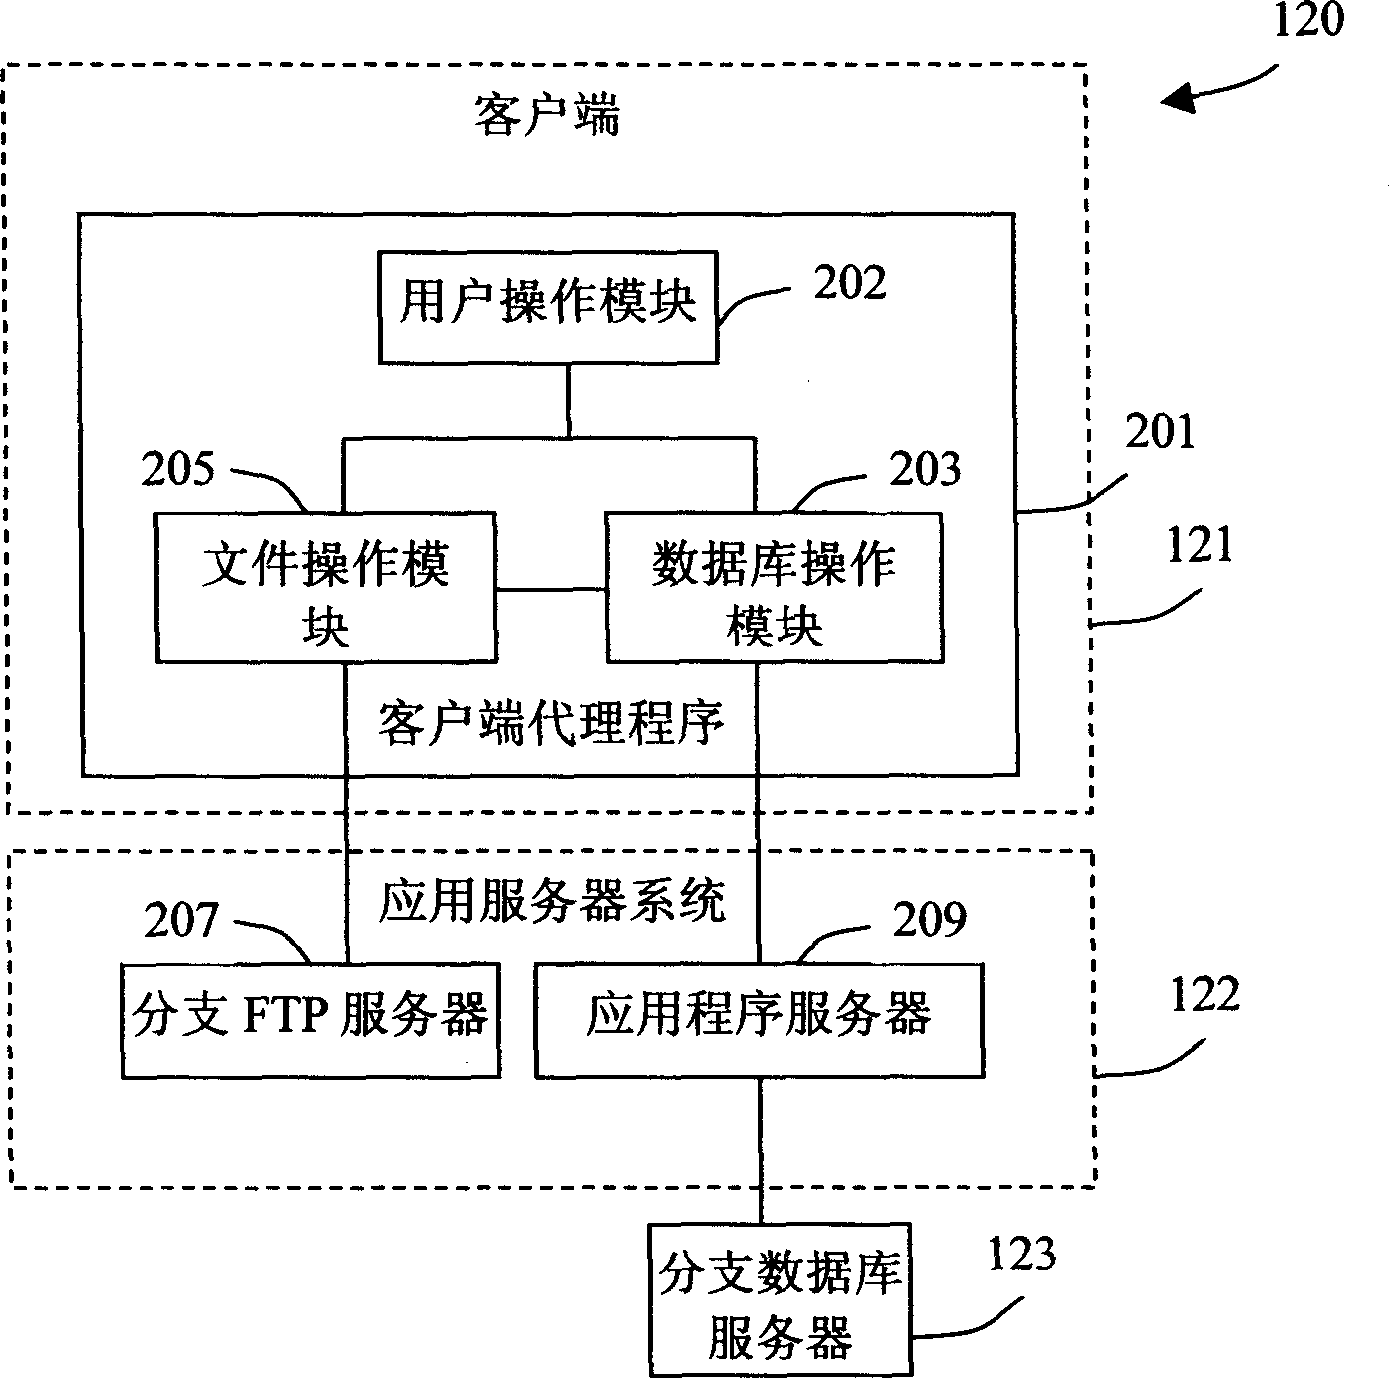 Synchronous system in distributed files and method